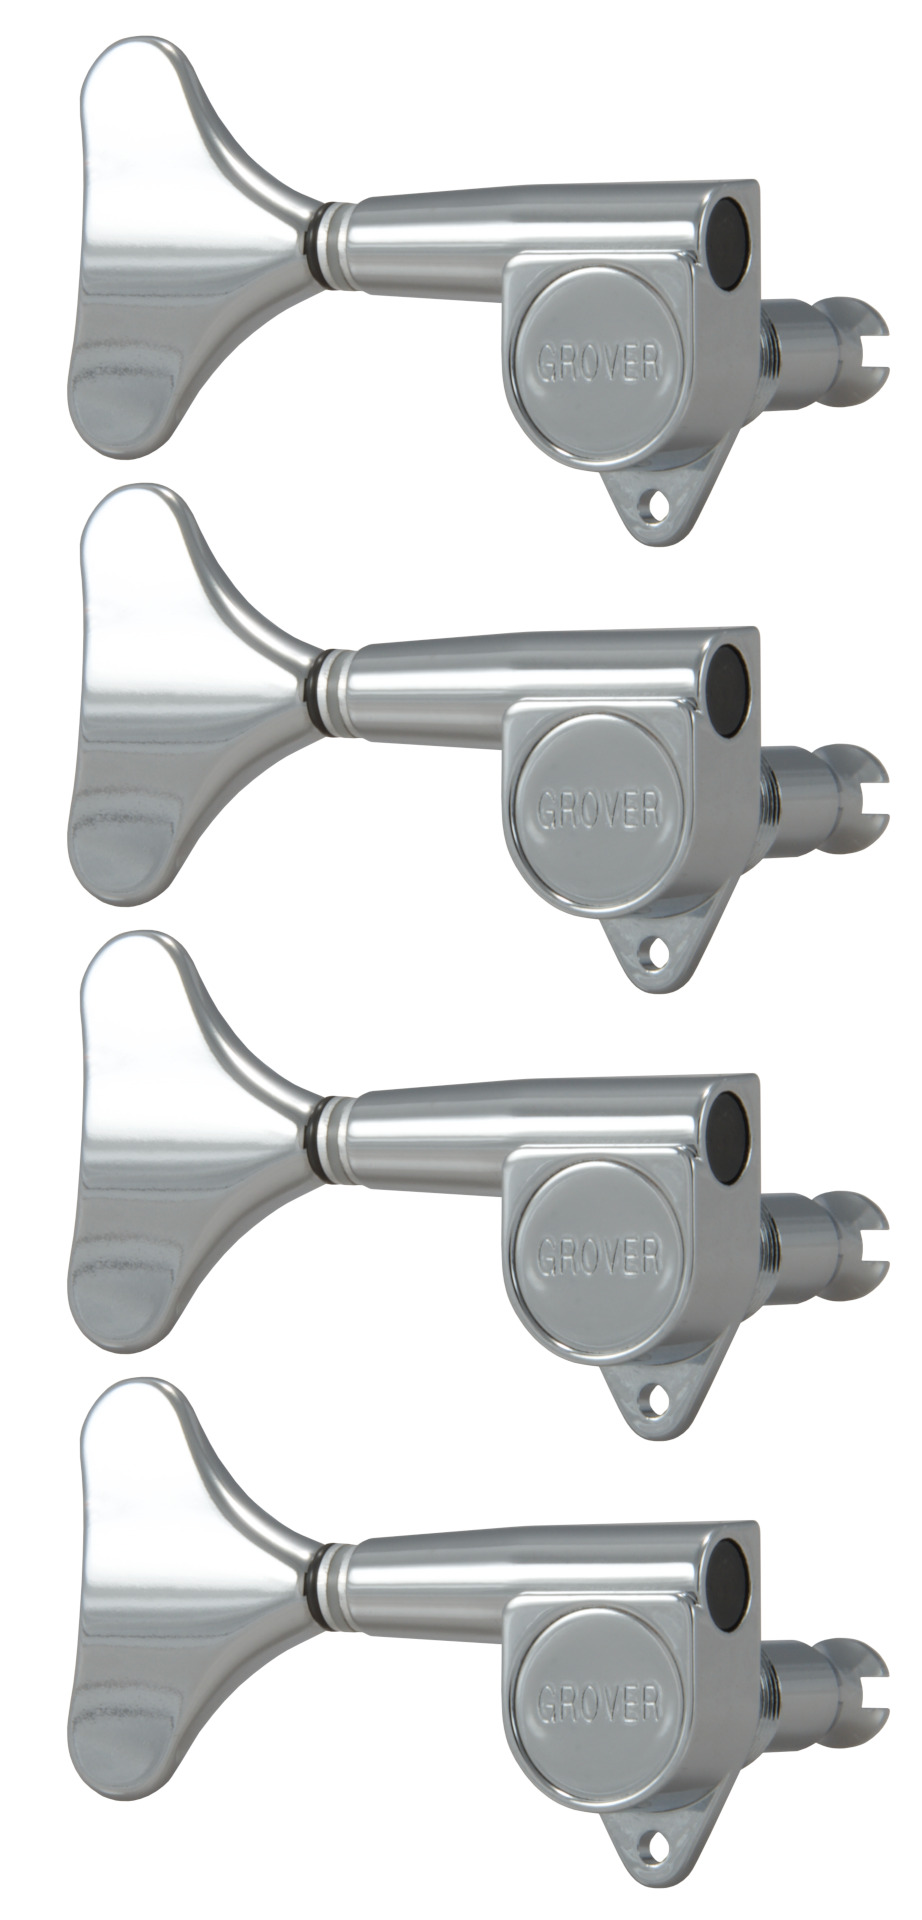 Grover 144CL4 Mini Bass Machines - Bass Machine Heads, 4-in-Line, Lefthand, Treble Side (Right) - Chrome